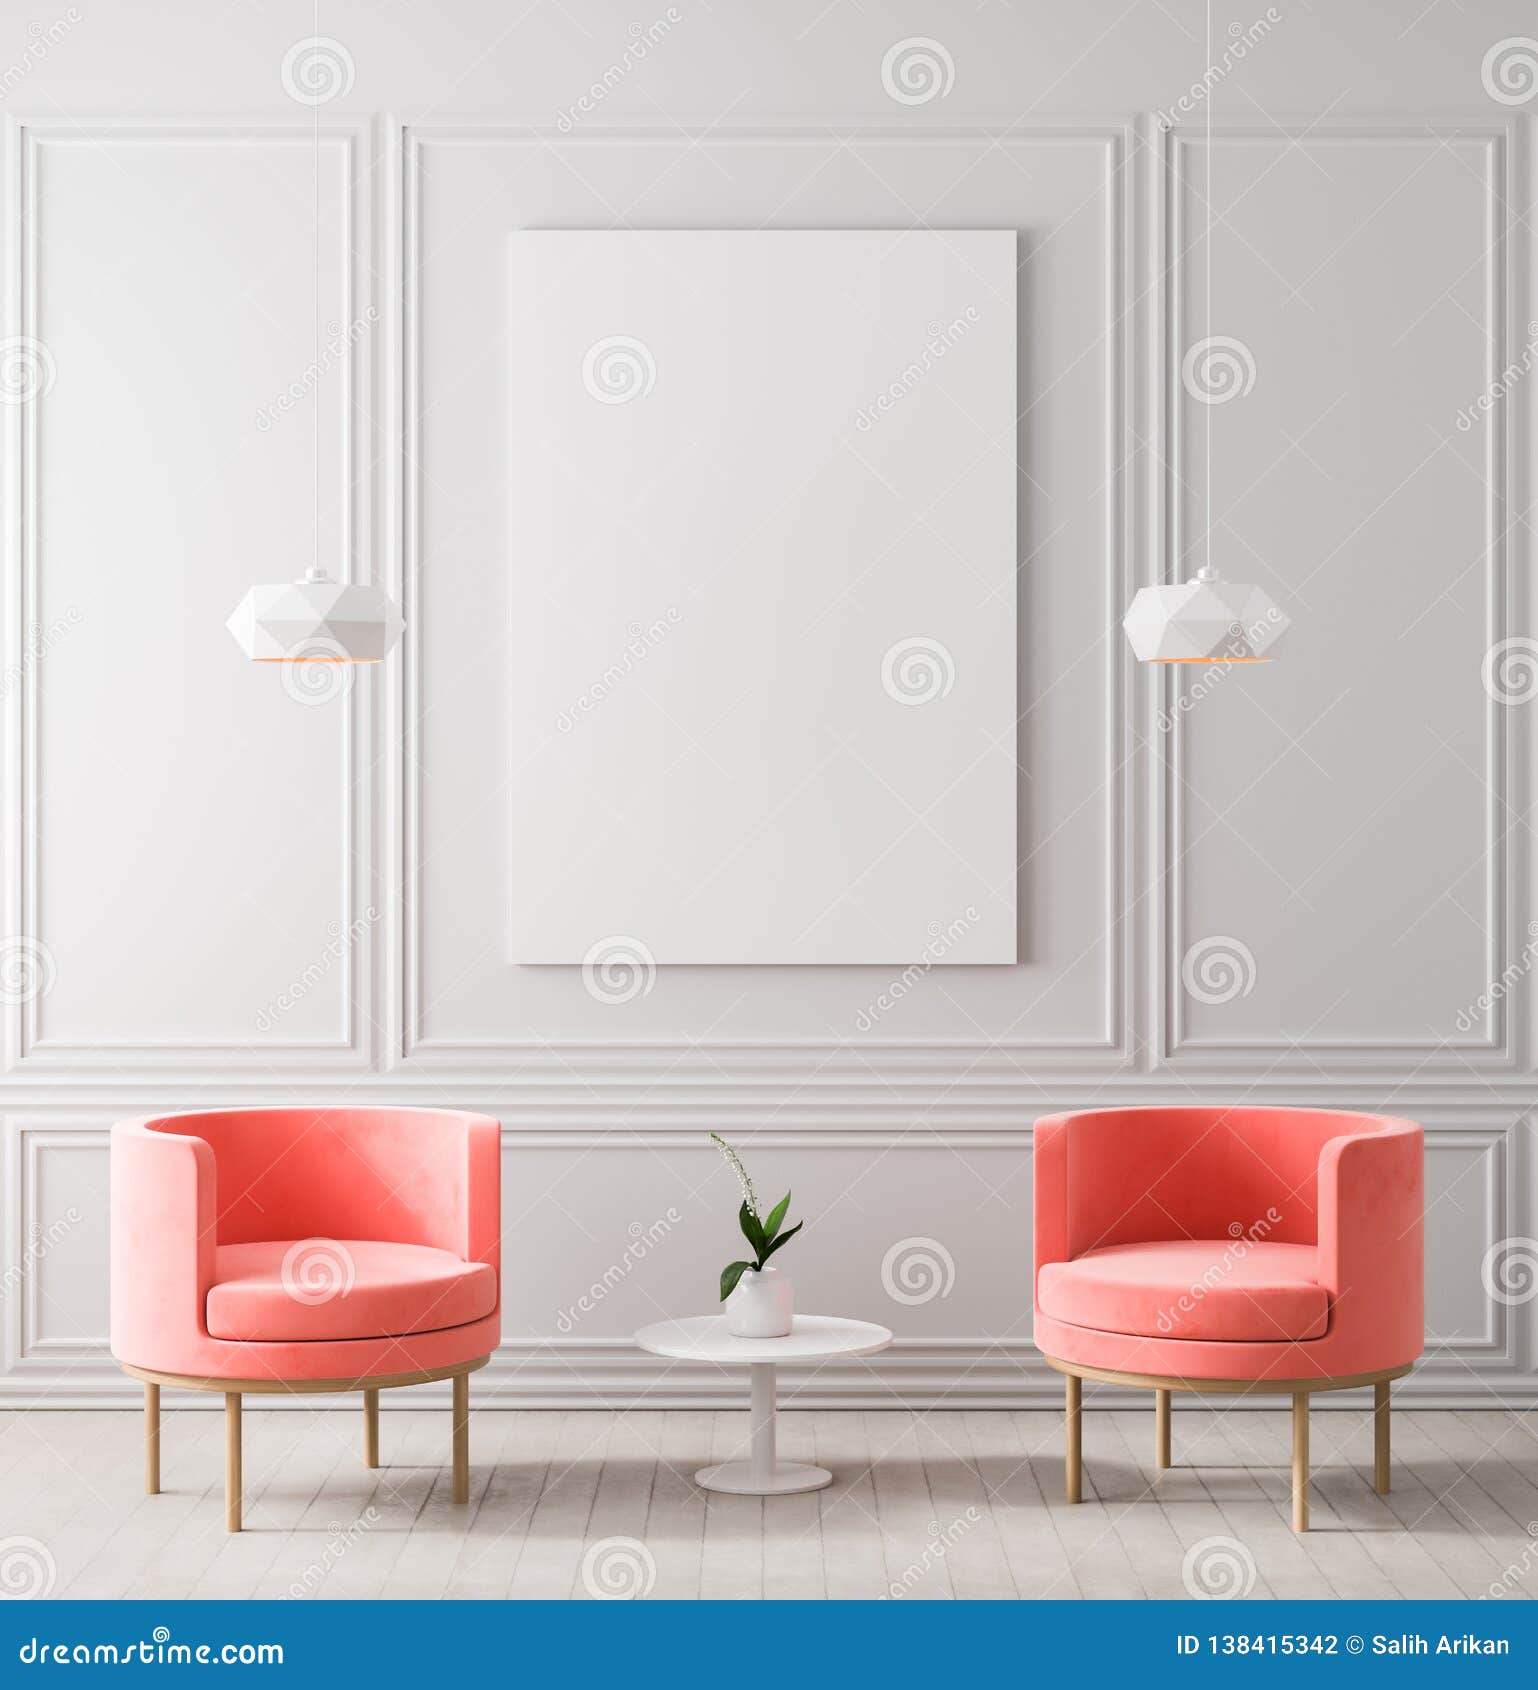 mock up poster frame in classic style interior. minimalist classic room with armchair. 3d 